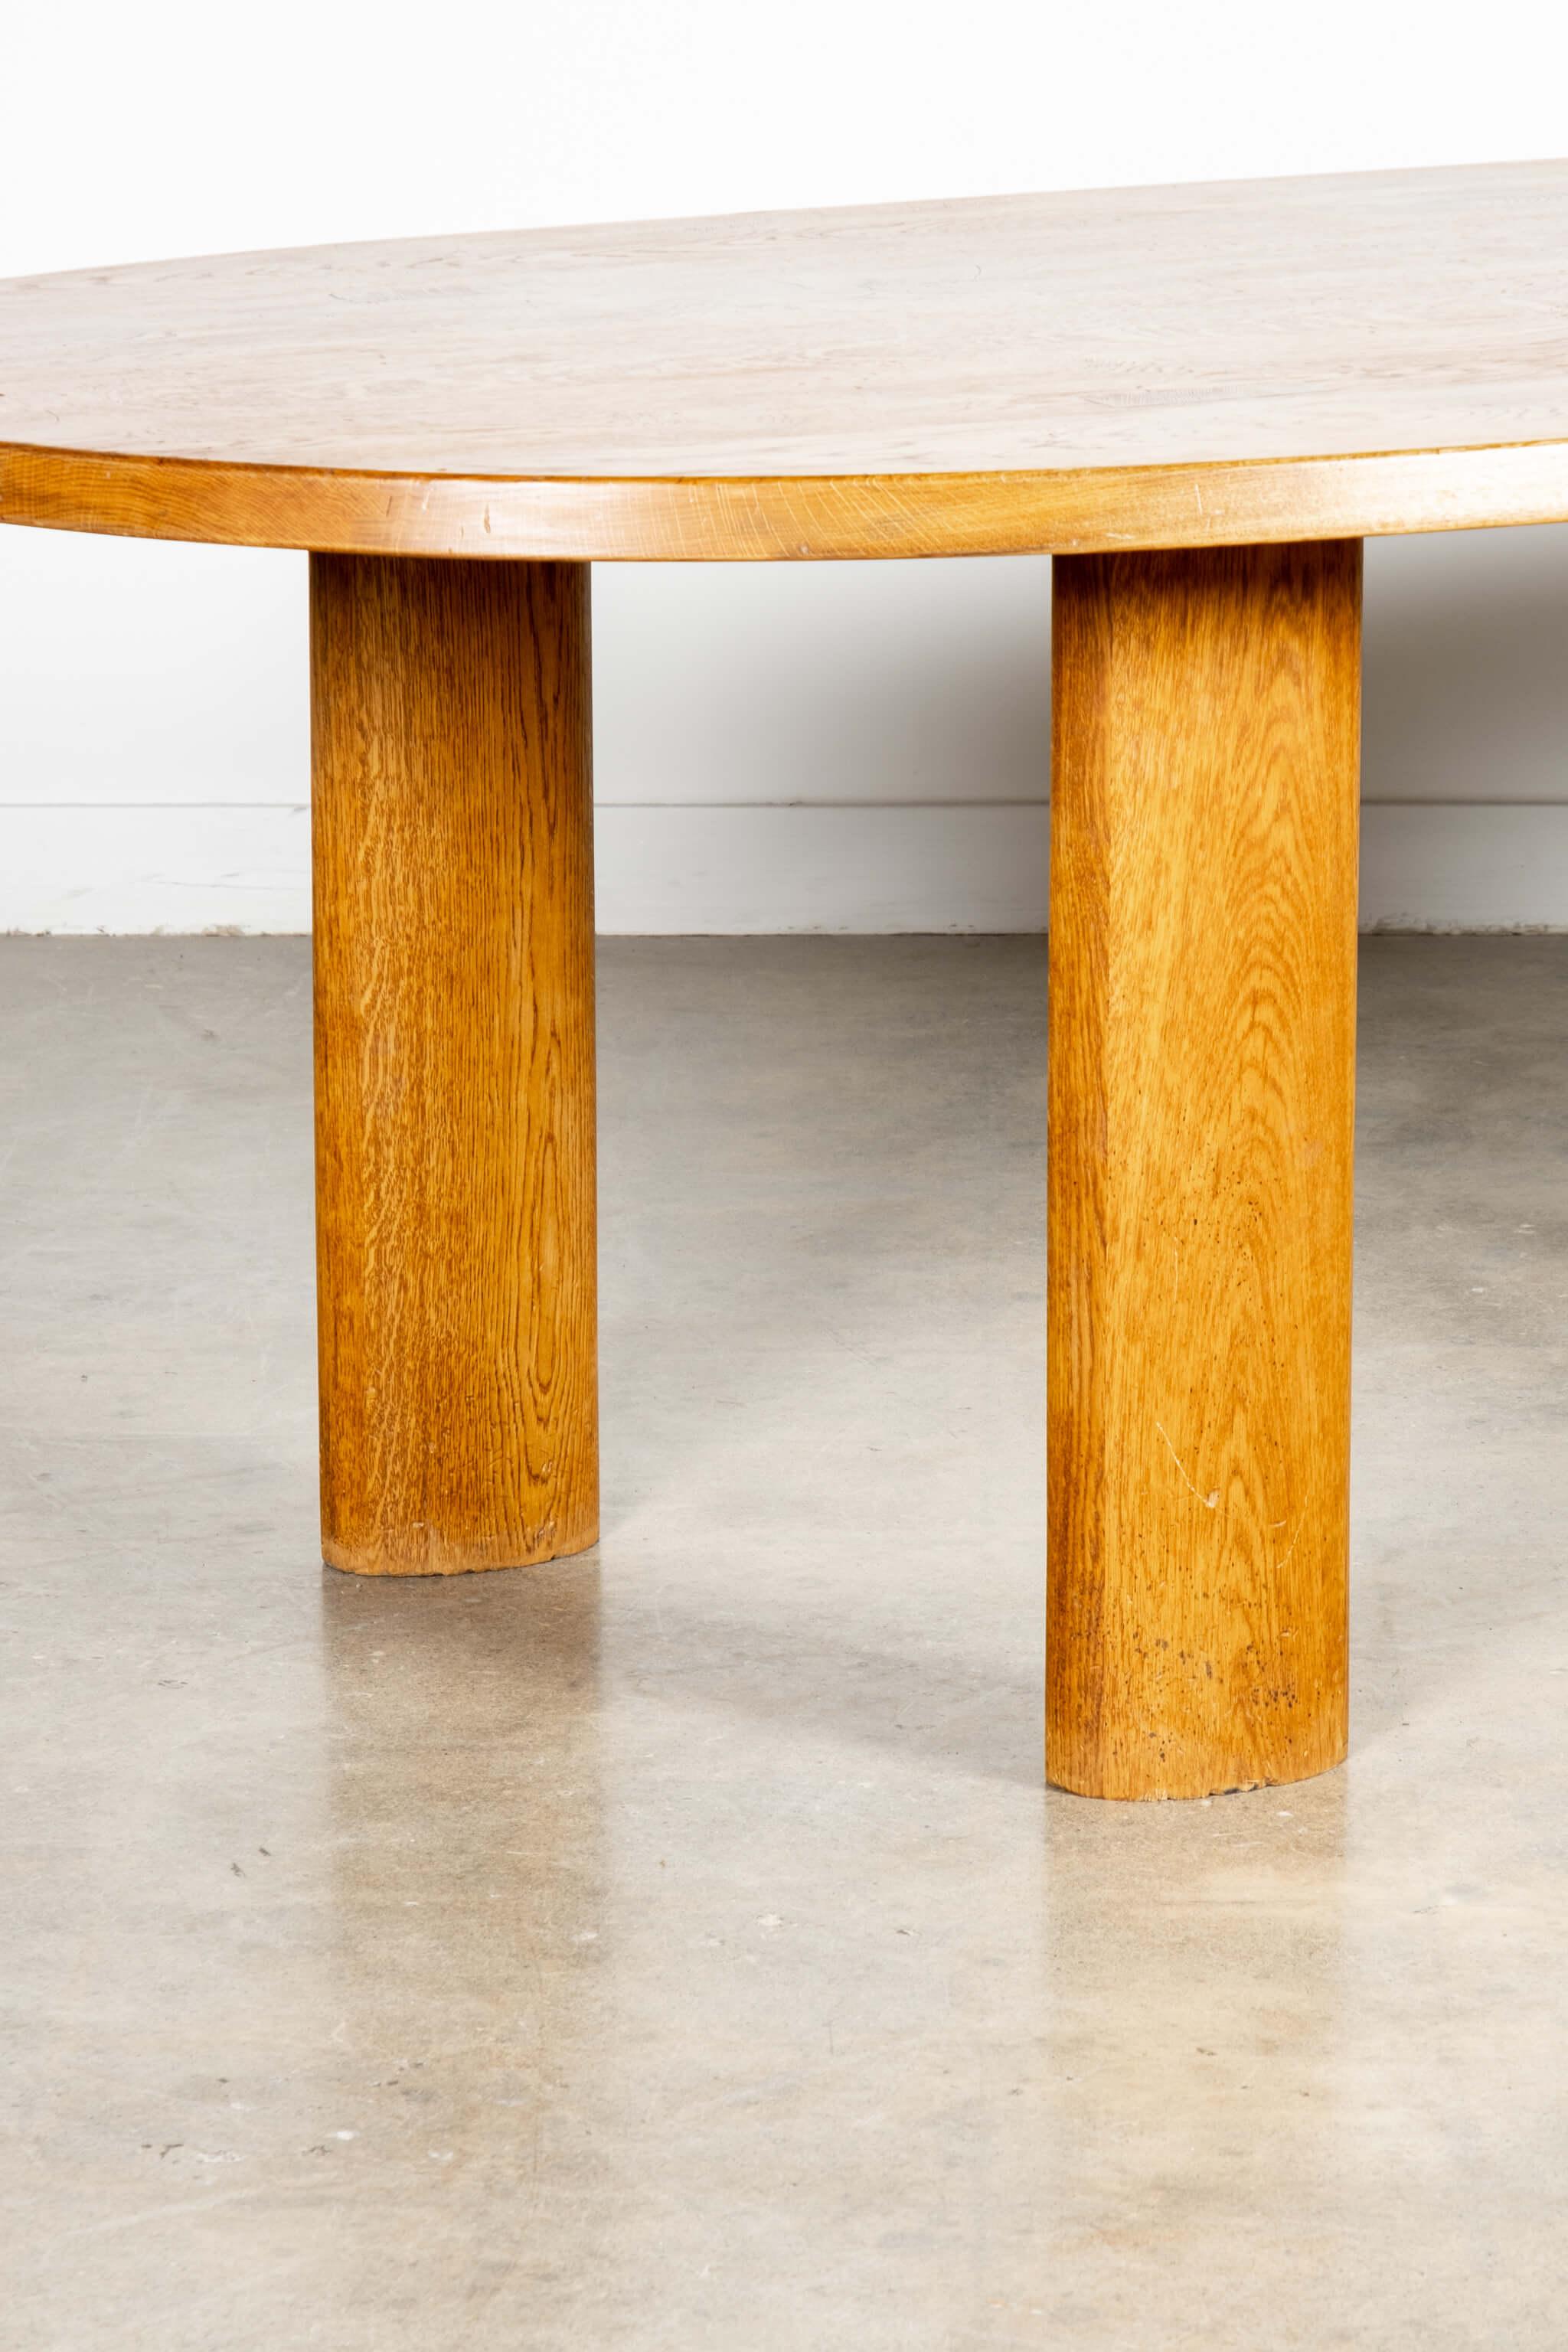 The 1950s Curved Wood Dining Table nach Charlotte Perriand im Zustand „Gut“ im Angebot in Toronto, CA